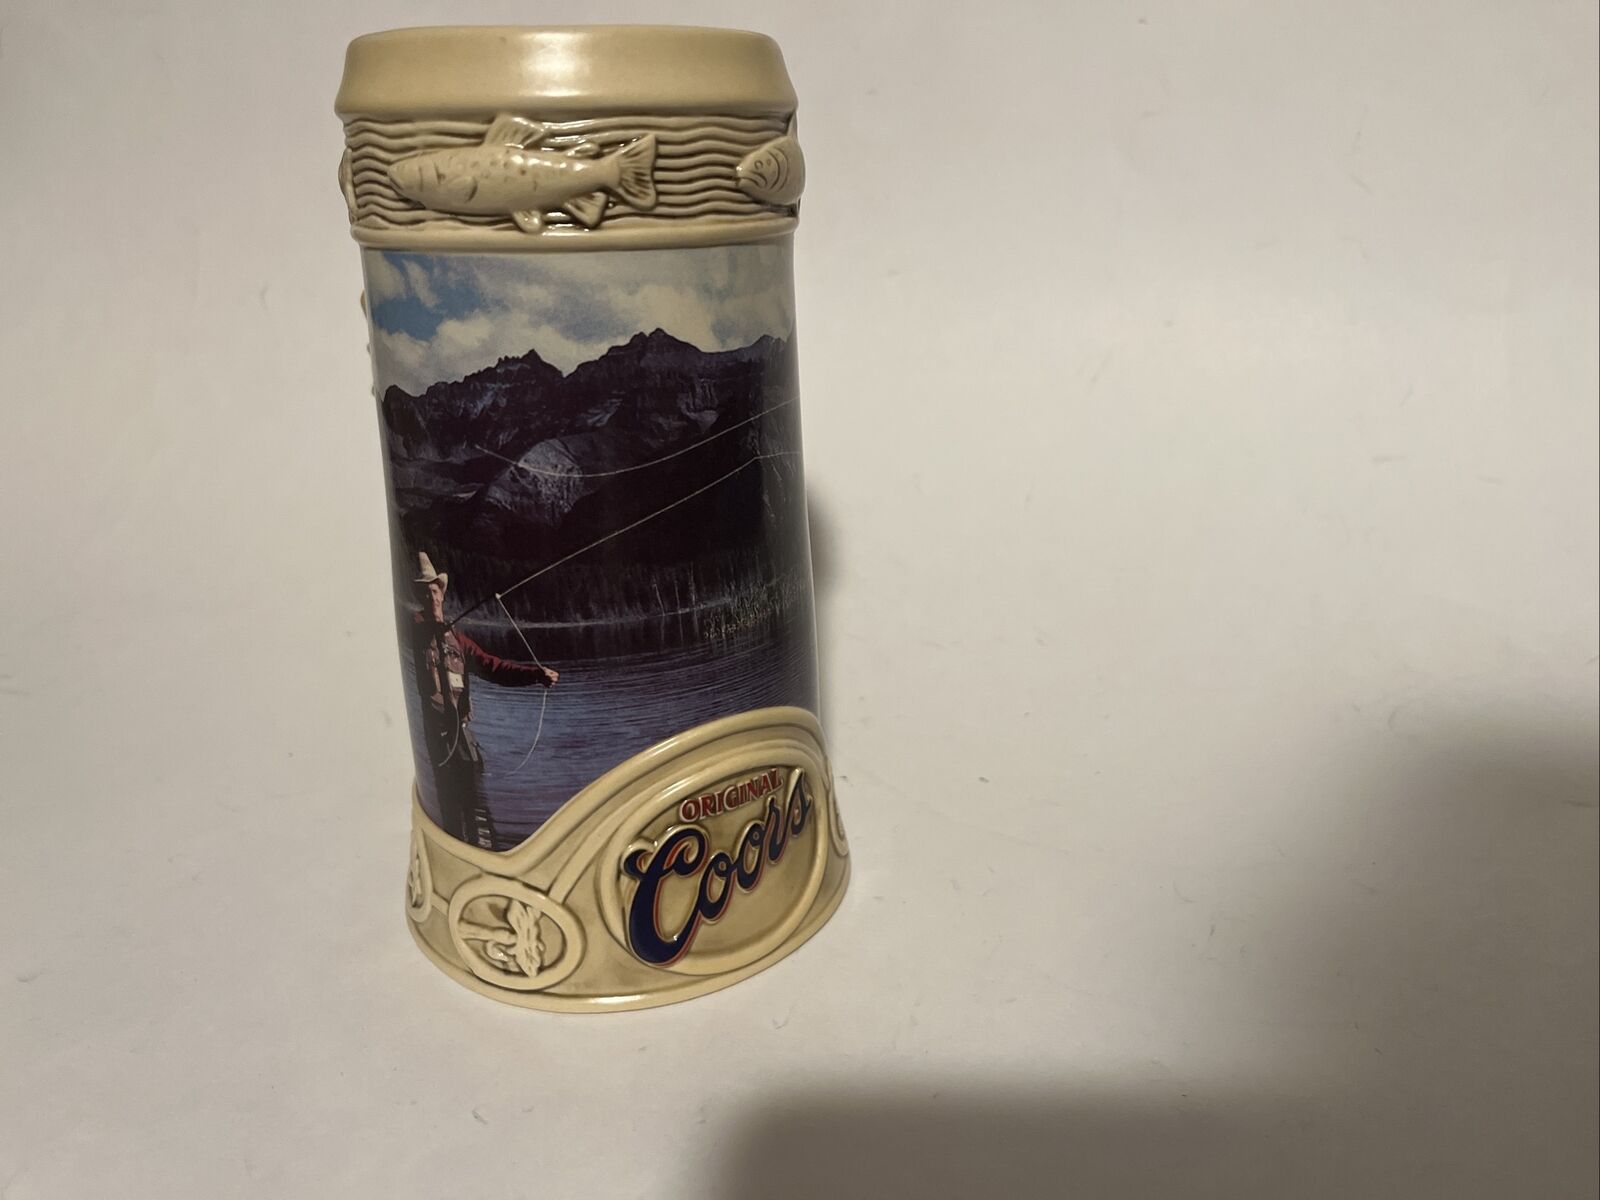 1996 COORS Beer Stein Life In The Rocky Mountains Mug 45918 Fly Fishing Nice Wow